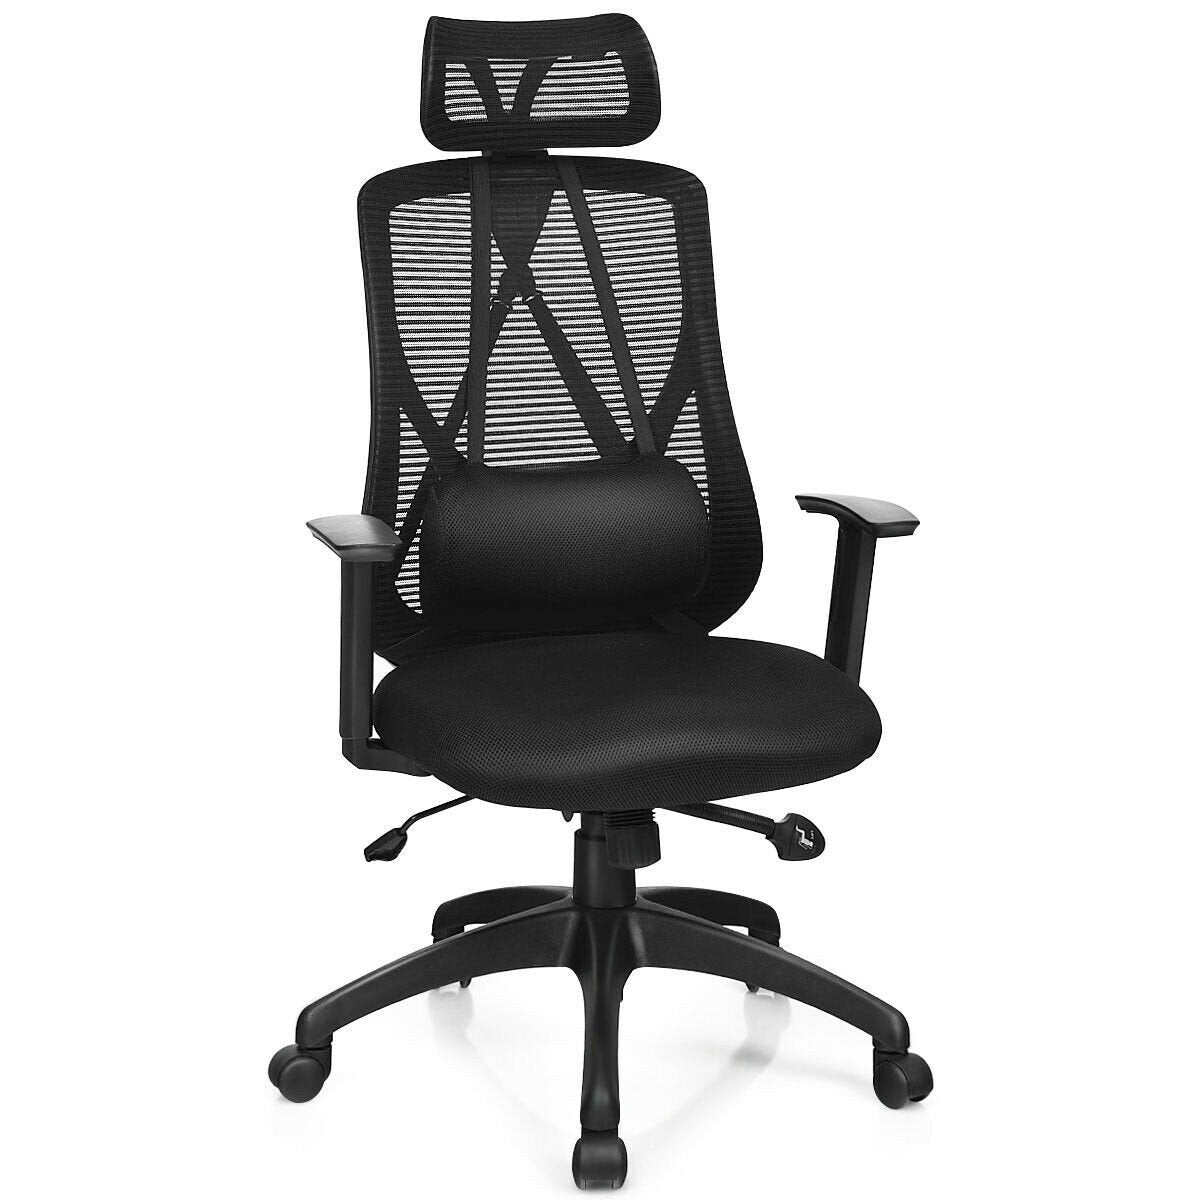 Gaming Chair - Recliner Adjustable Mesh Office Chair